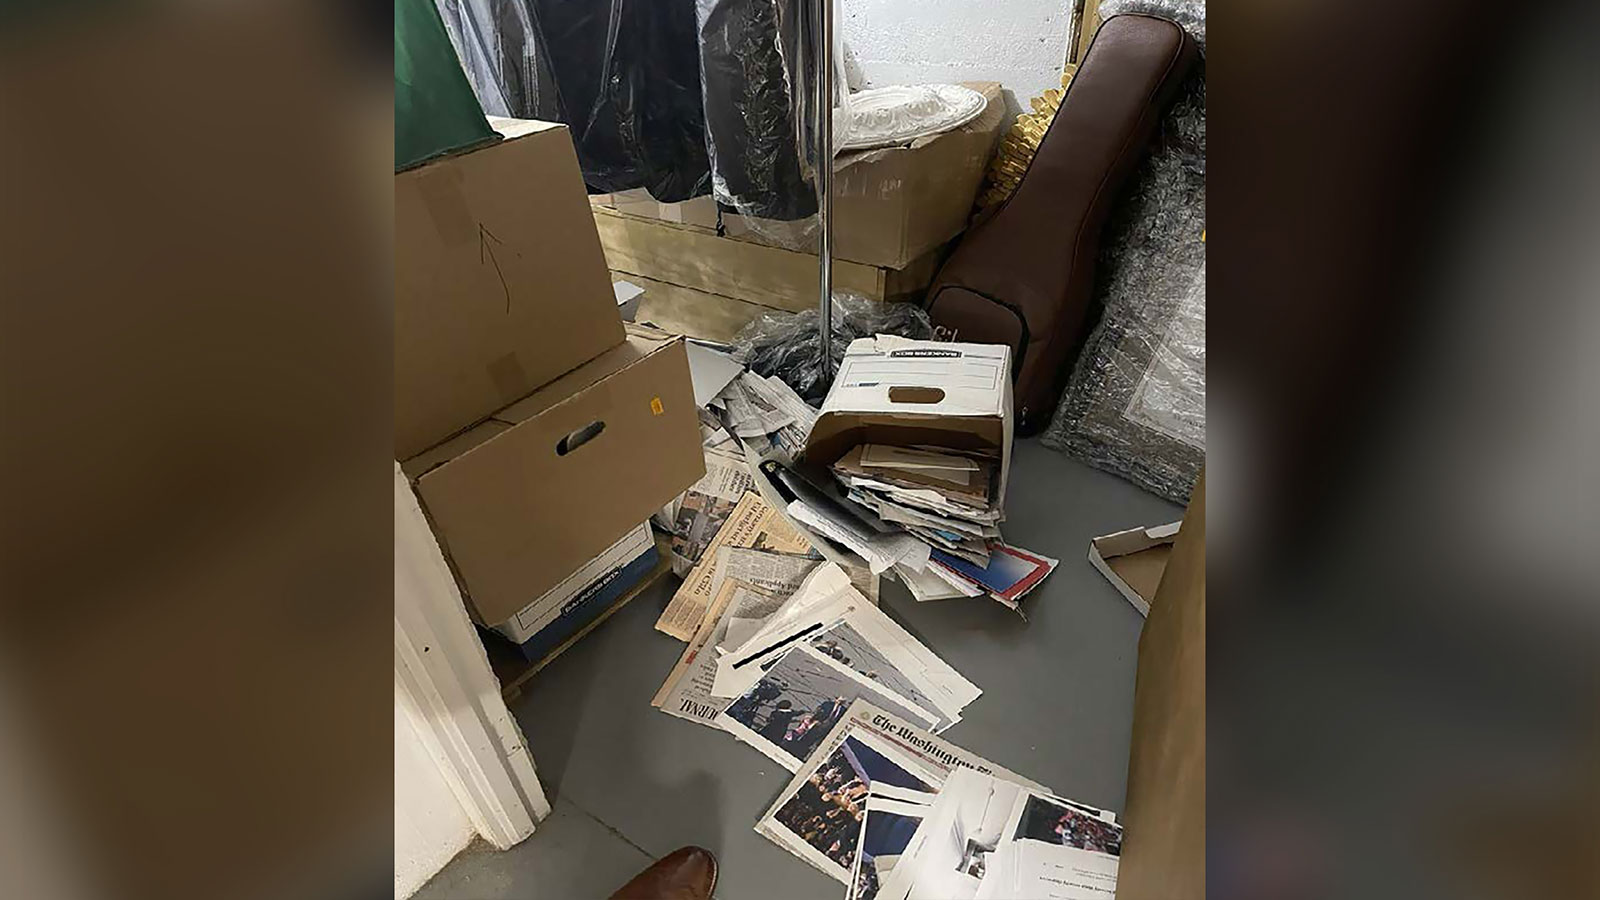 Fallen boxes spill documents onto the floor in this photo included in Donald Trump’s federal indictment.